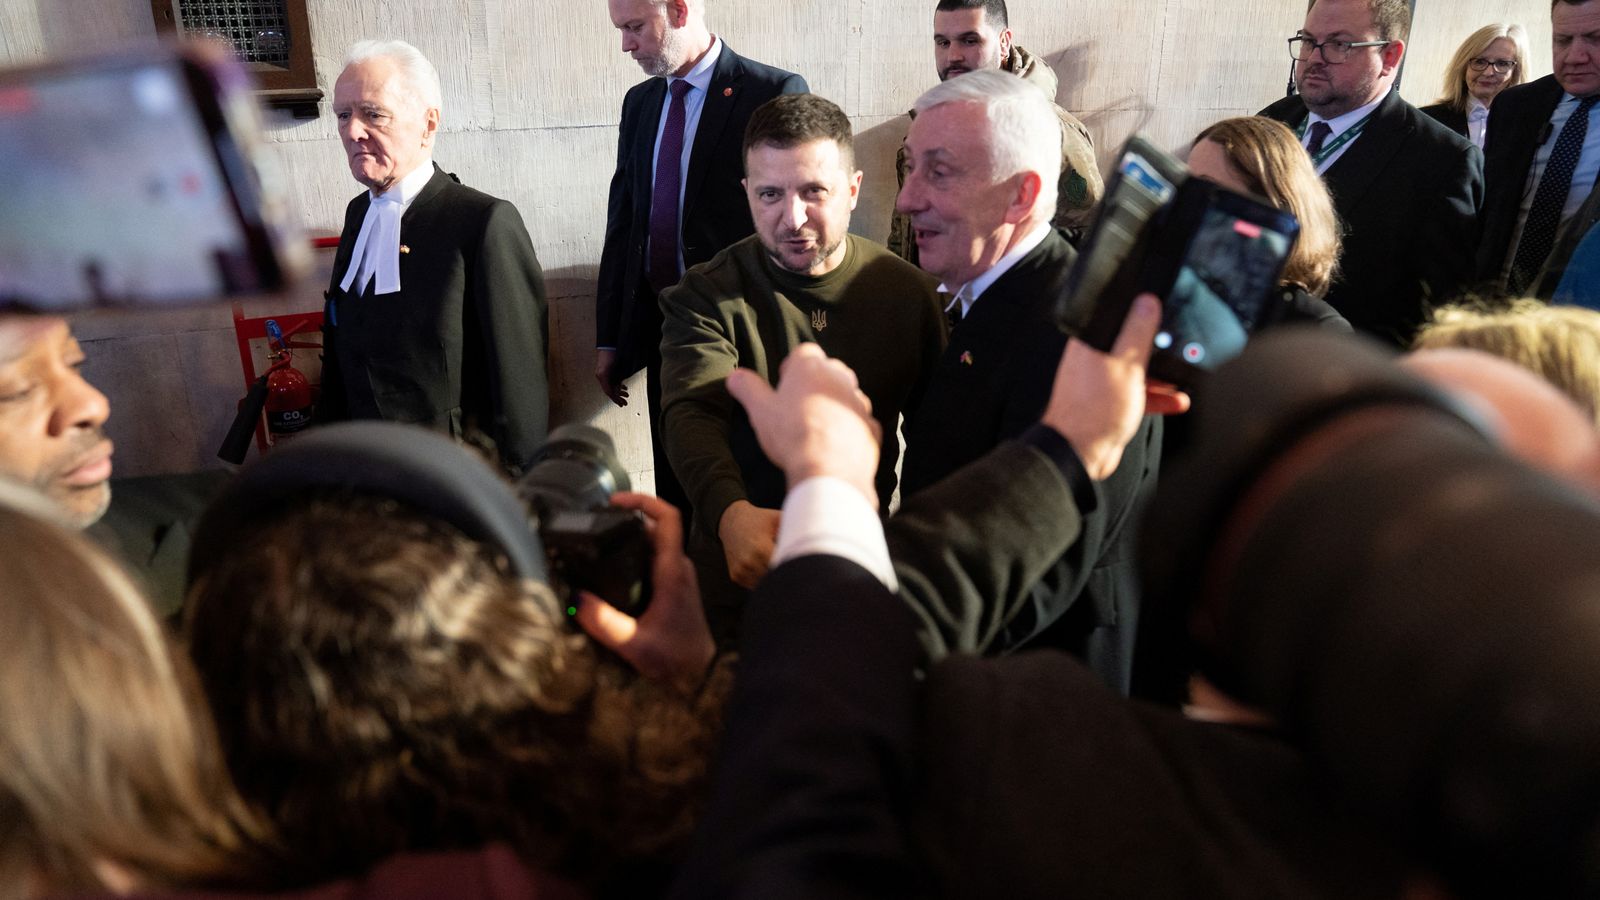 Zelenskyy cheered as he says 'freedom will win' during historic address to UK parliament